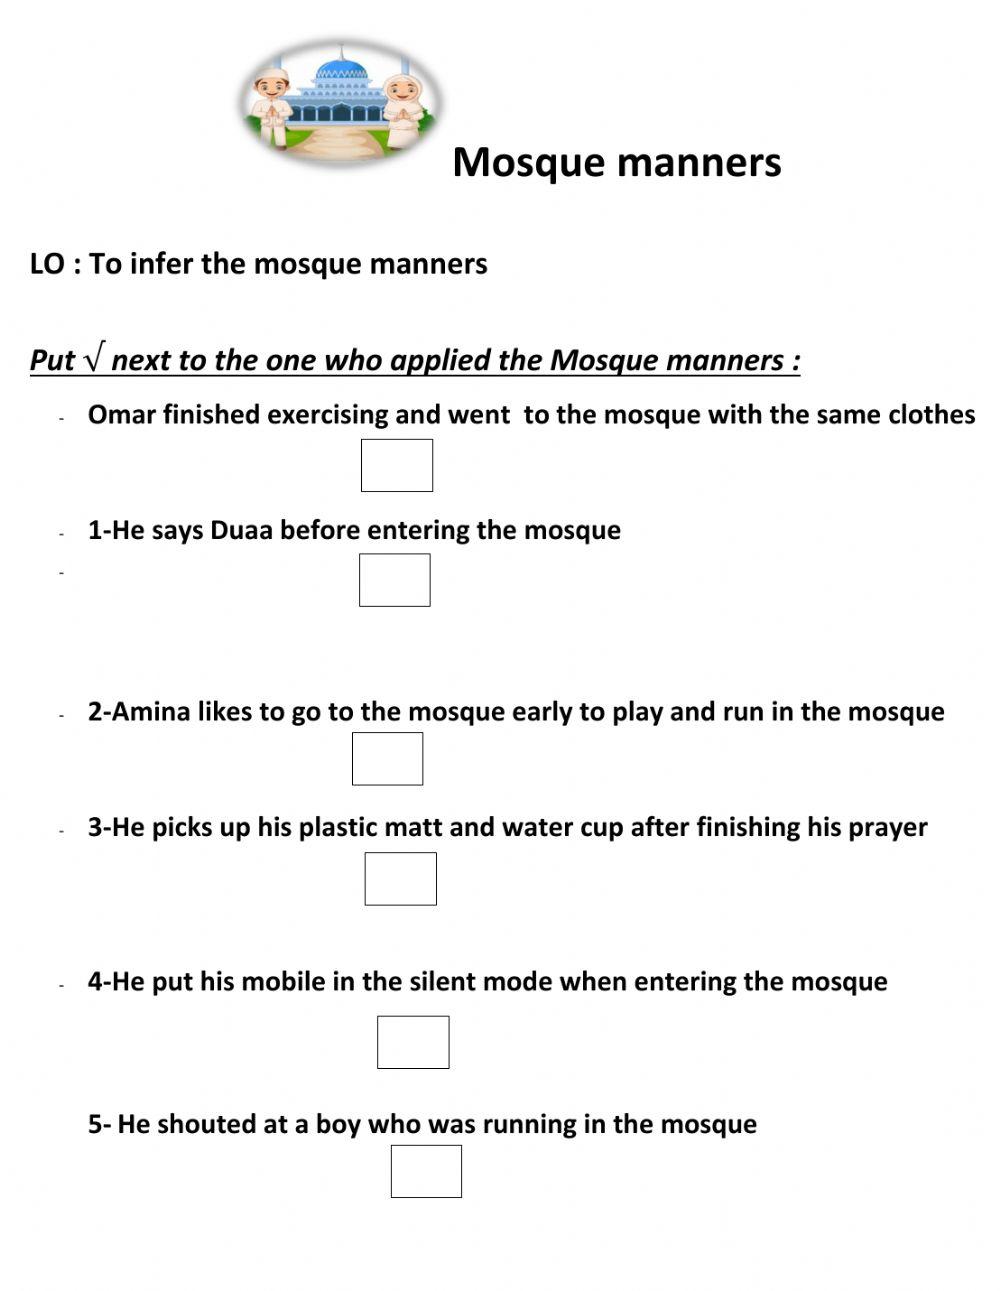 Mosque manners